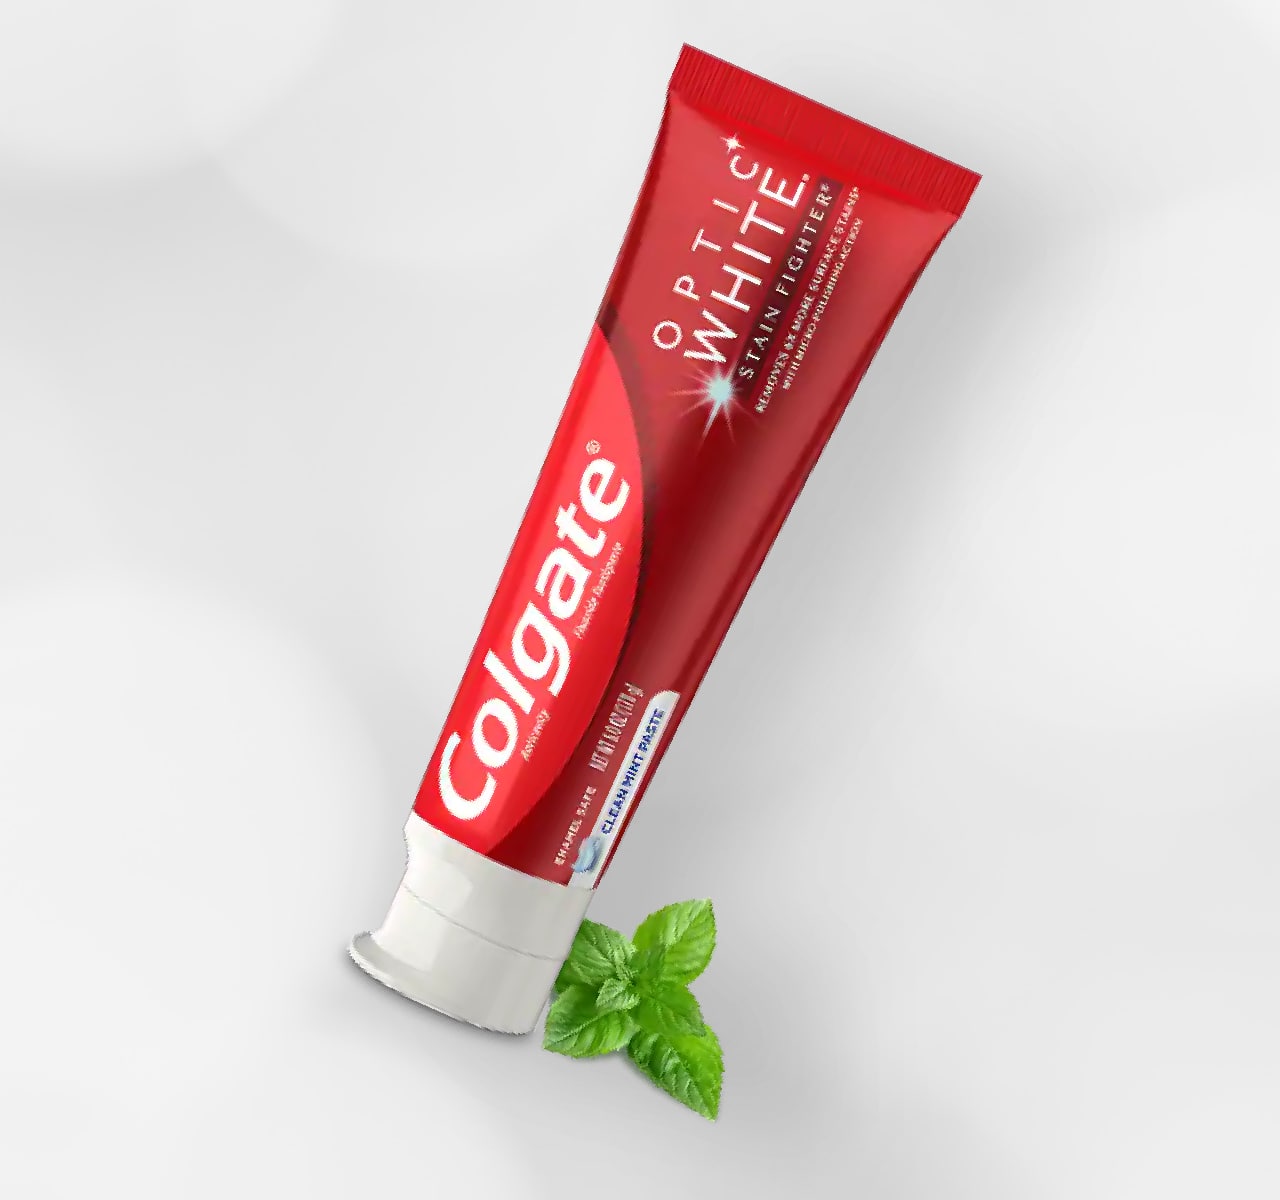 Colgate Optic White With Charcoal Whitening Toothpaste - Cool Mint